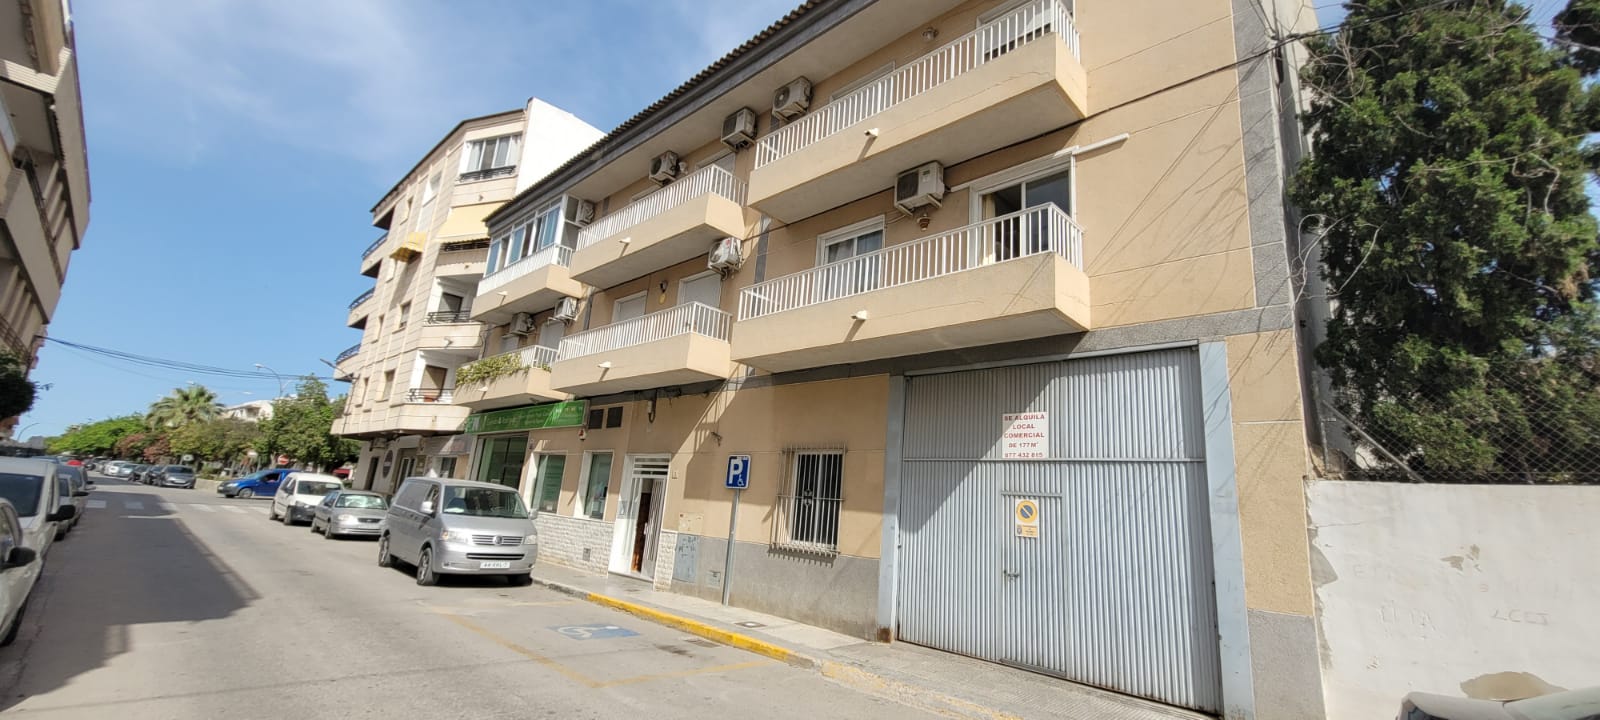 For sale: 3 bedroom apartment / flat in Dolores, Costa Blanca